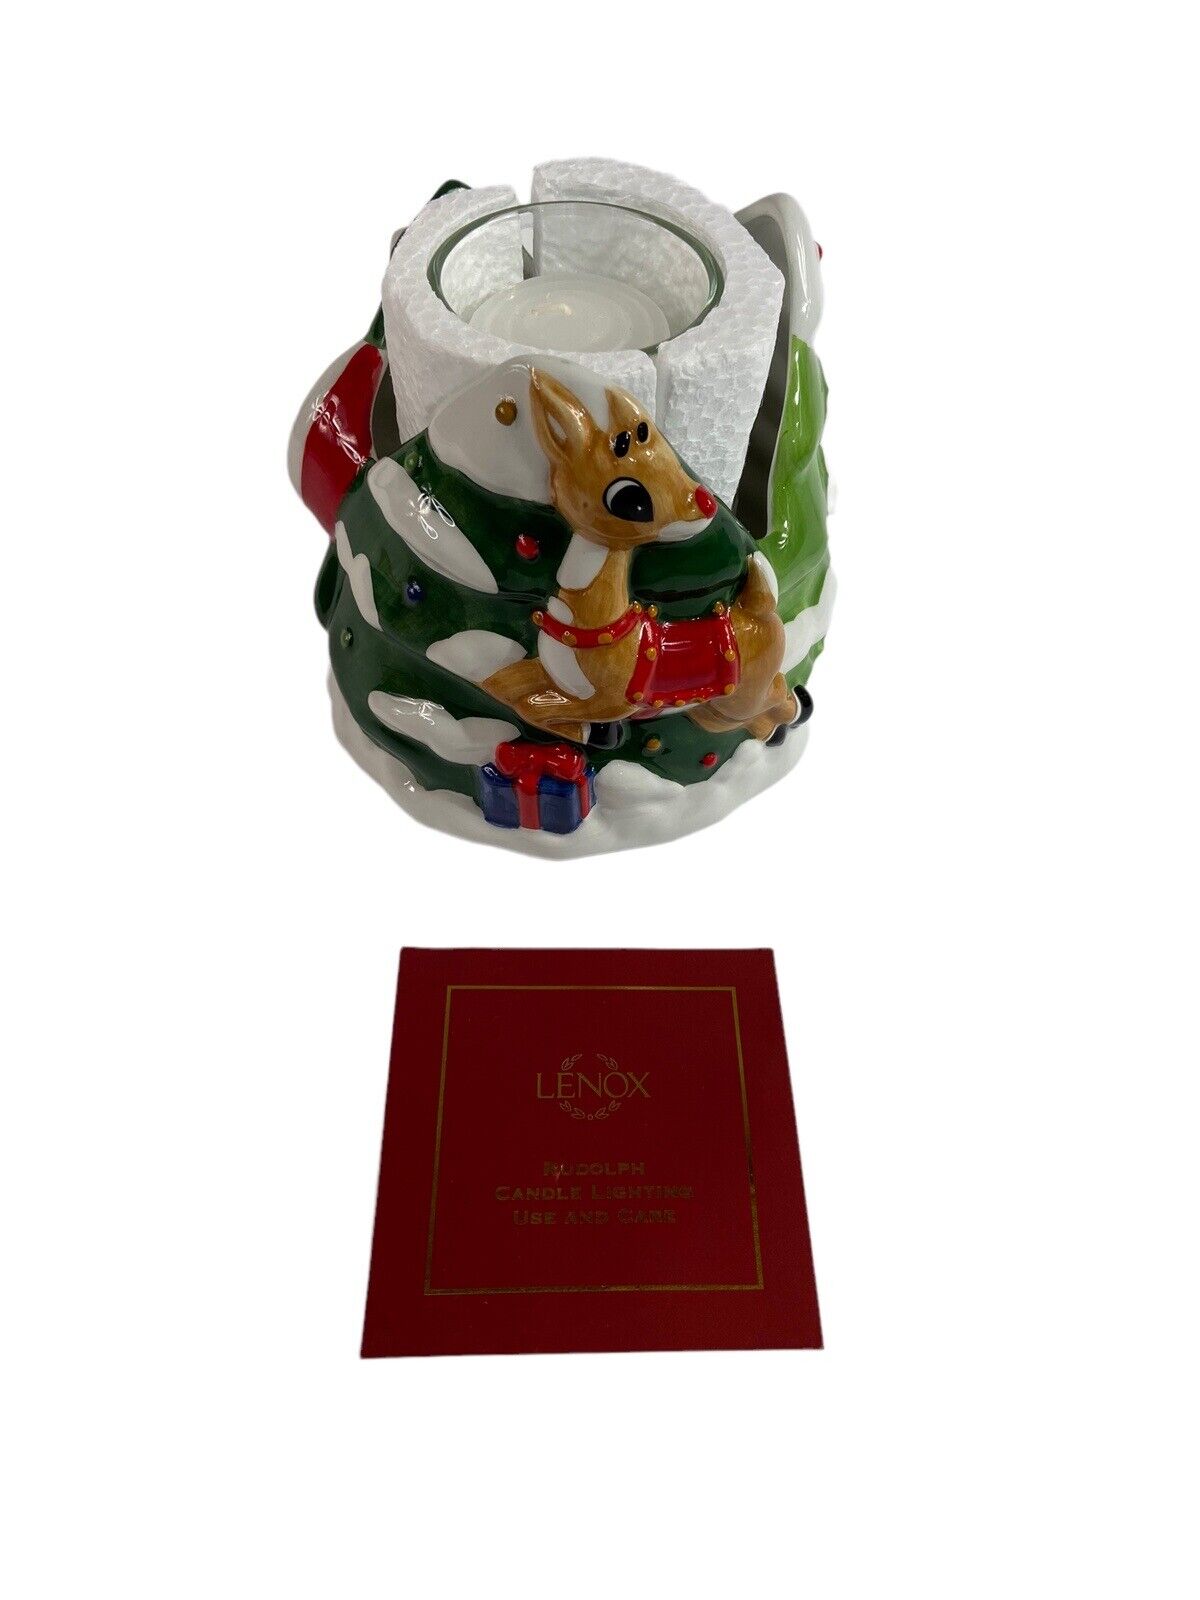 Rudolph The Red Nosed Reindeer LENOX  Ceramic Candle Holder Votive NEW in Box